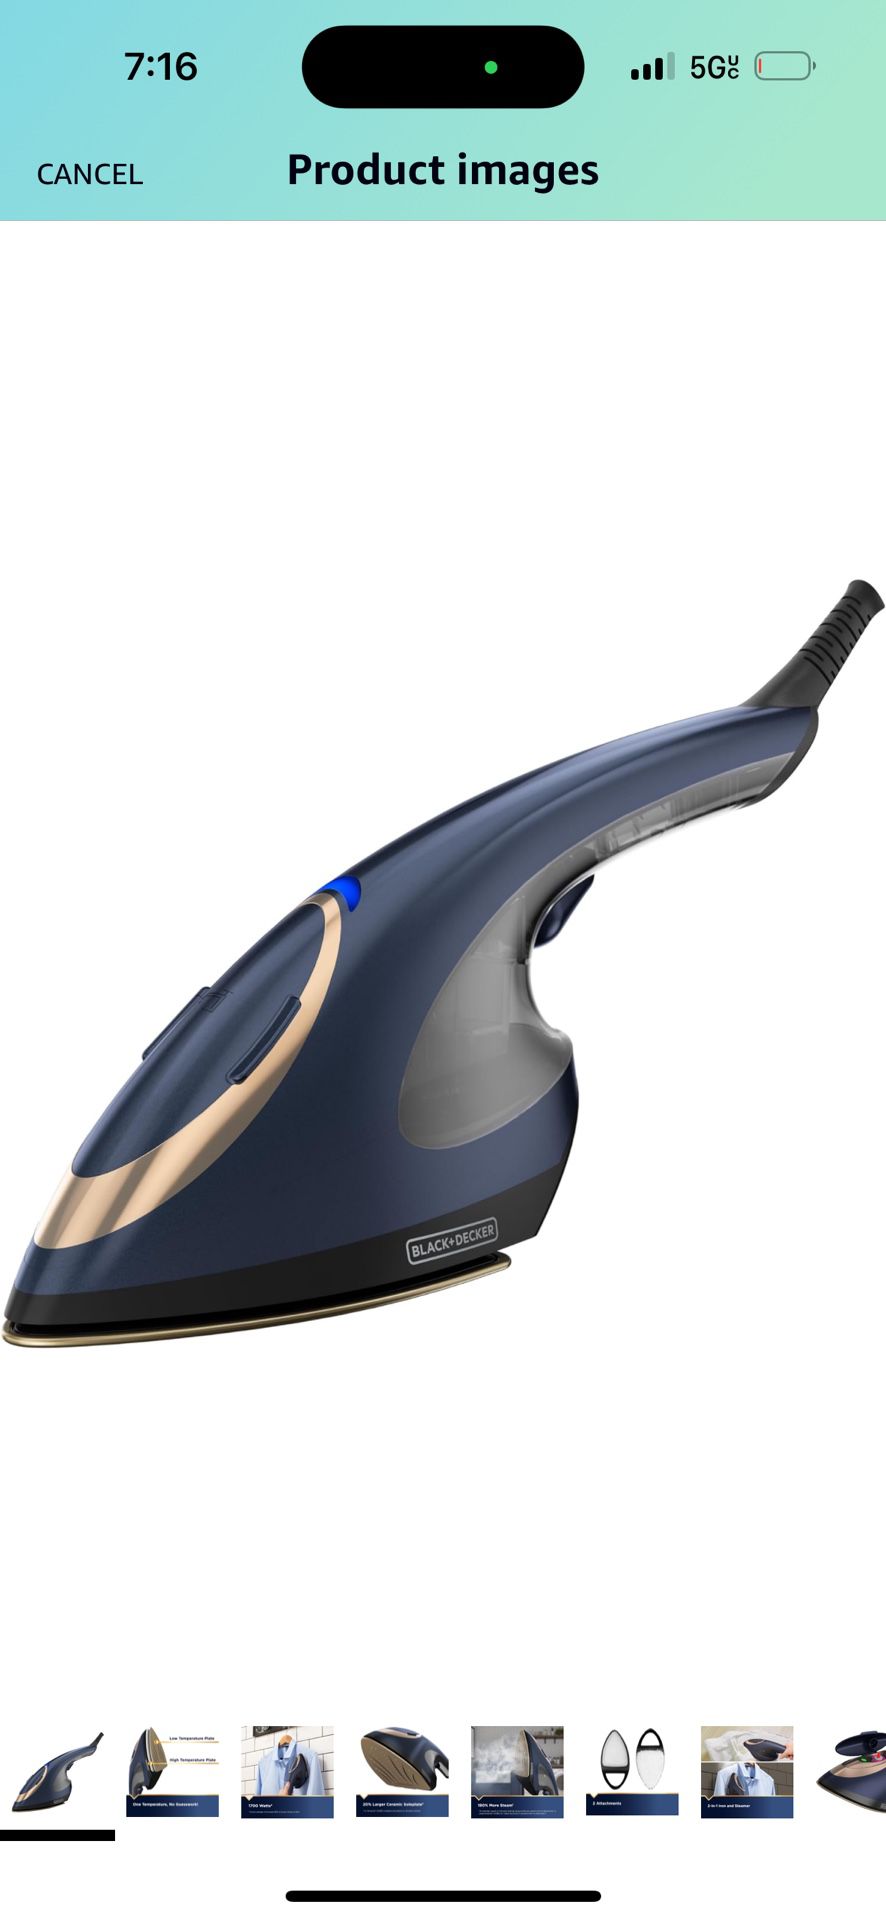 BLACK+DECKER Press & Steam 2-in-1 Iron and Steamer, 180% More Steam & One Temperature Technology, Ceramic Soleplate, Safe on All Fabric Types